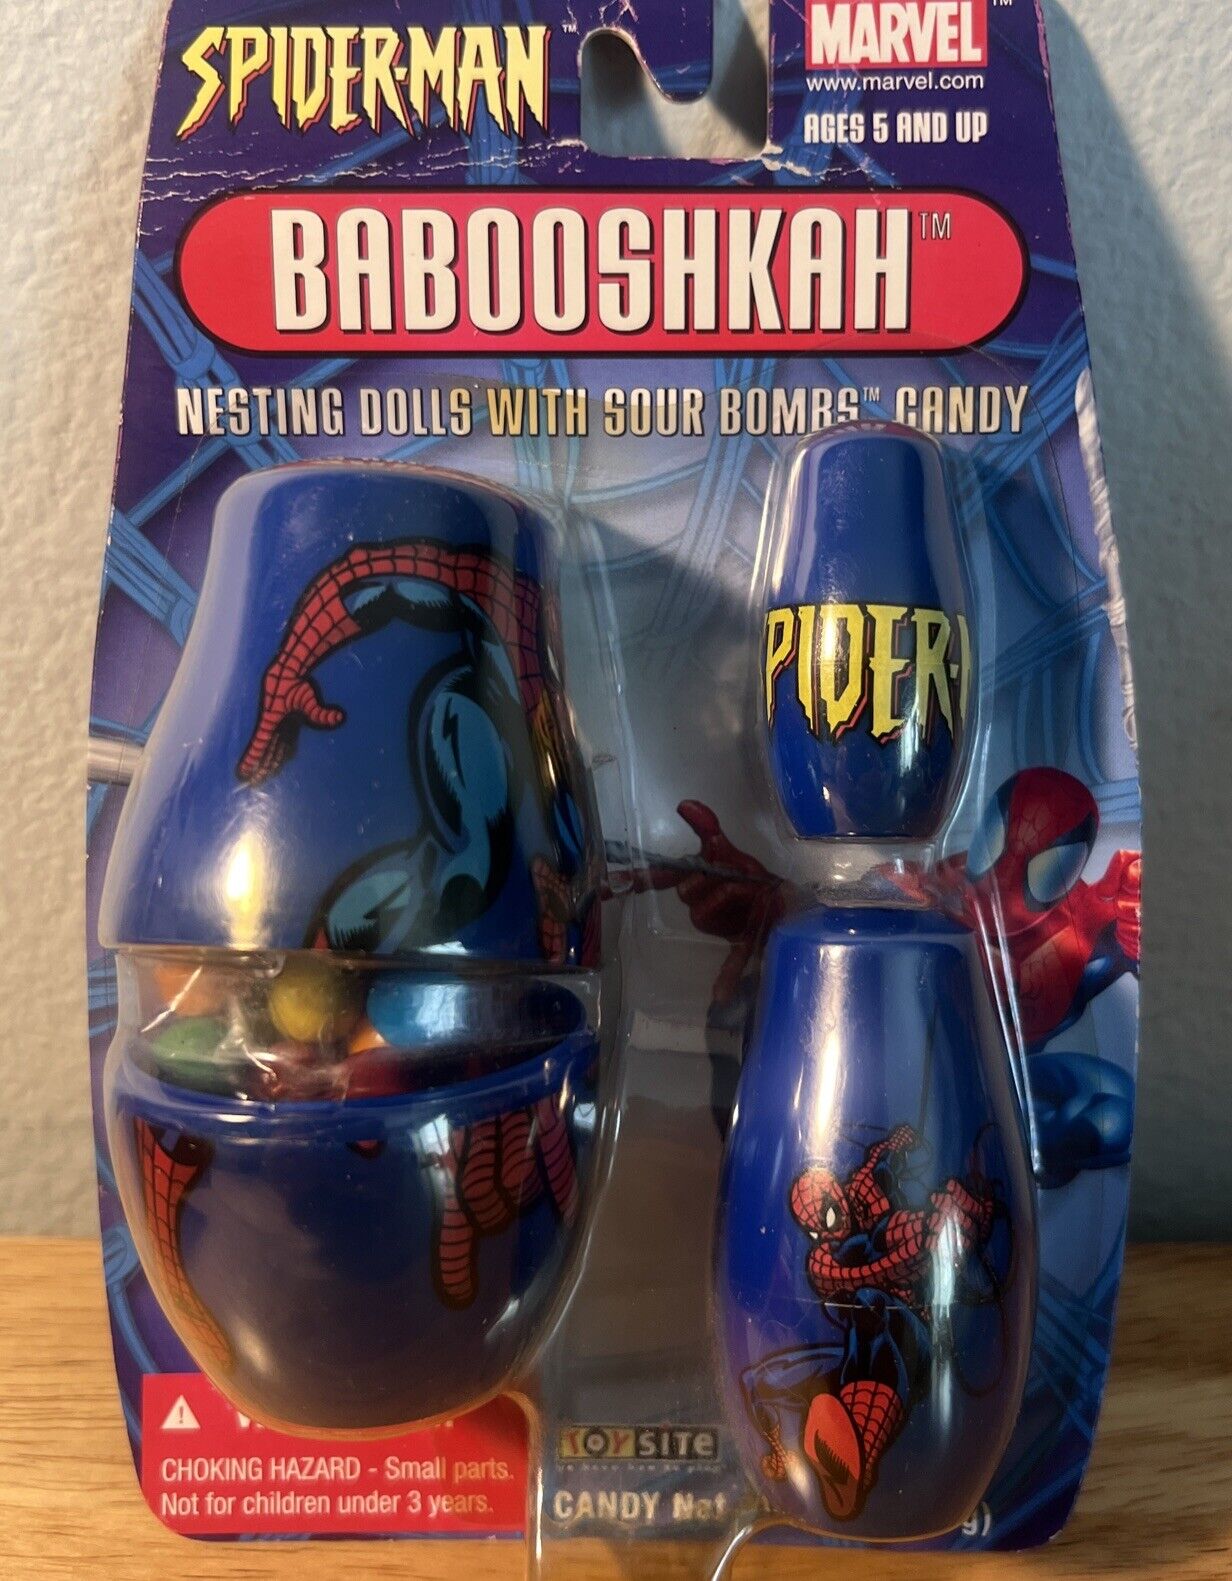 TOYSITE BABOOSHKAH NESTING DOLLS WITH SOUR BOMBS CANDY SPIDER-MAN RARE VINTAGE